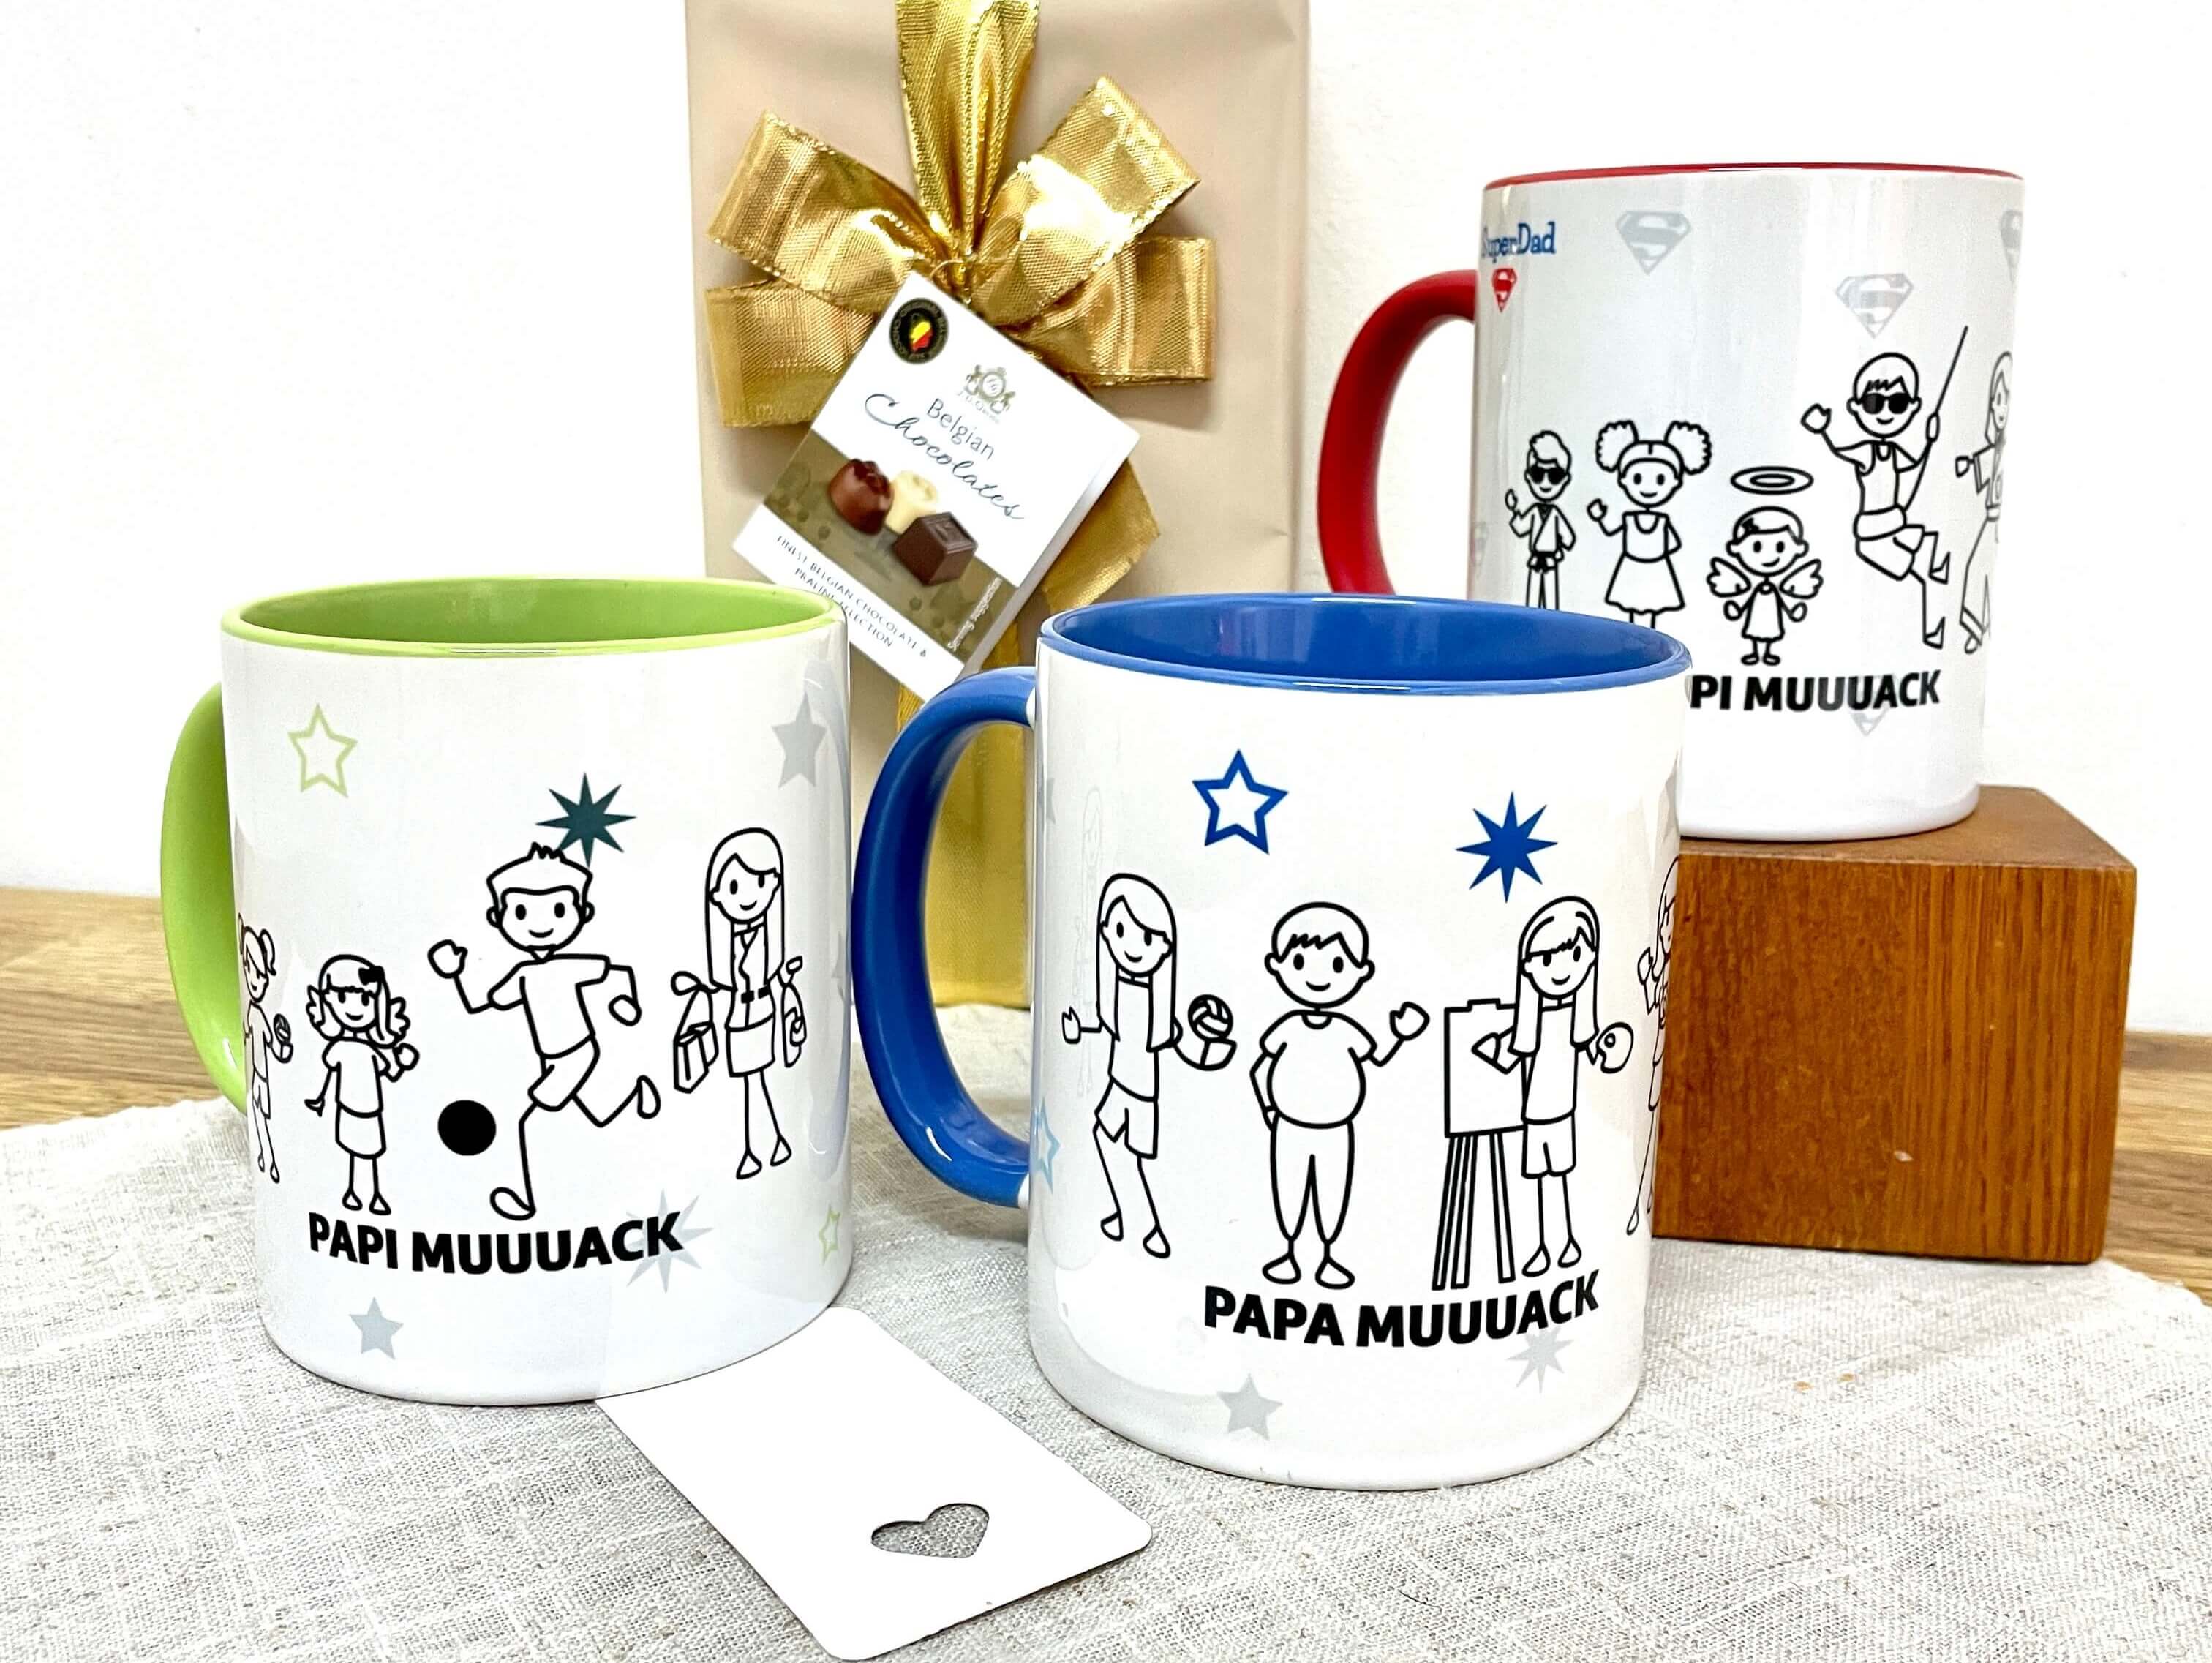 Personalised mugs as gift ideas for father's day